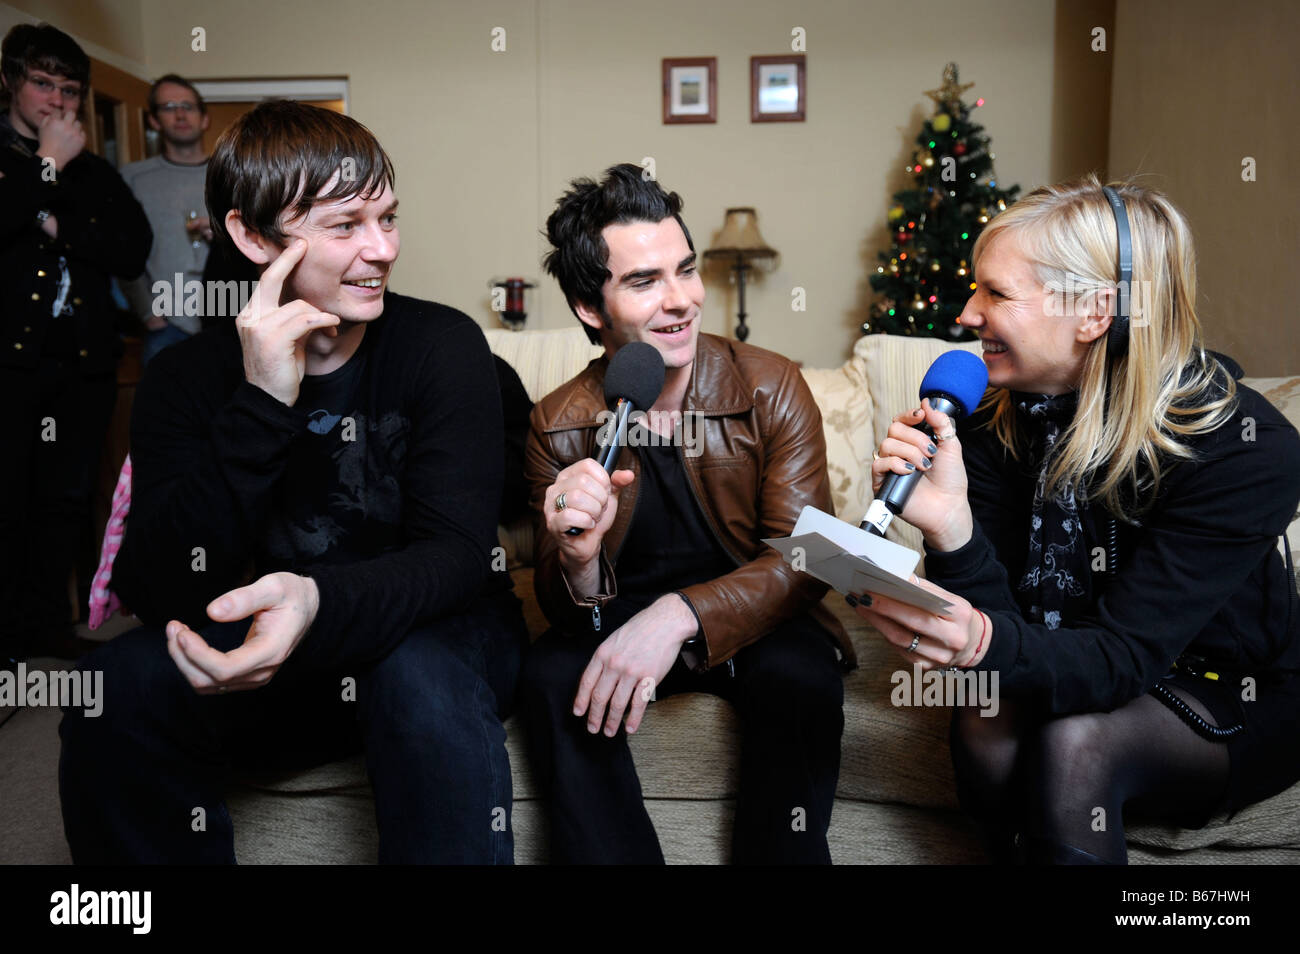 STEREOPHONICS SINGER KELLY JONES WITH BASSIST RICHARD JONES BEING INTERVIEWED BY JO WHILEY OF RADIO ONE AT THEIR FAMILY HOME IN Stock Photo